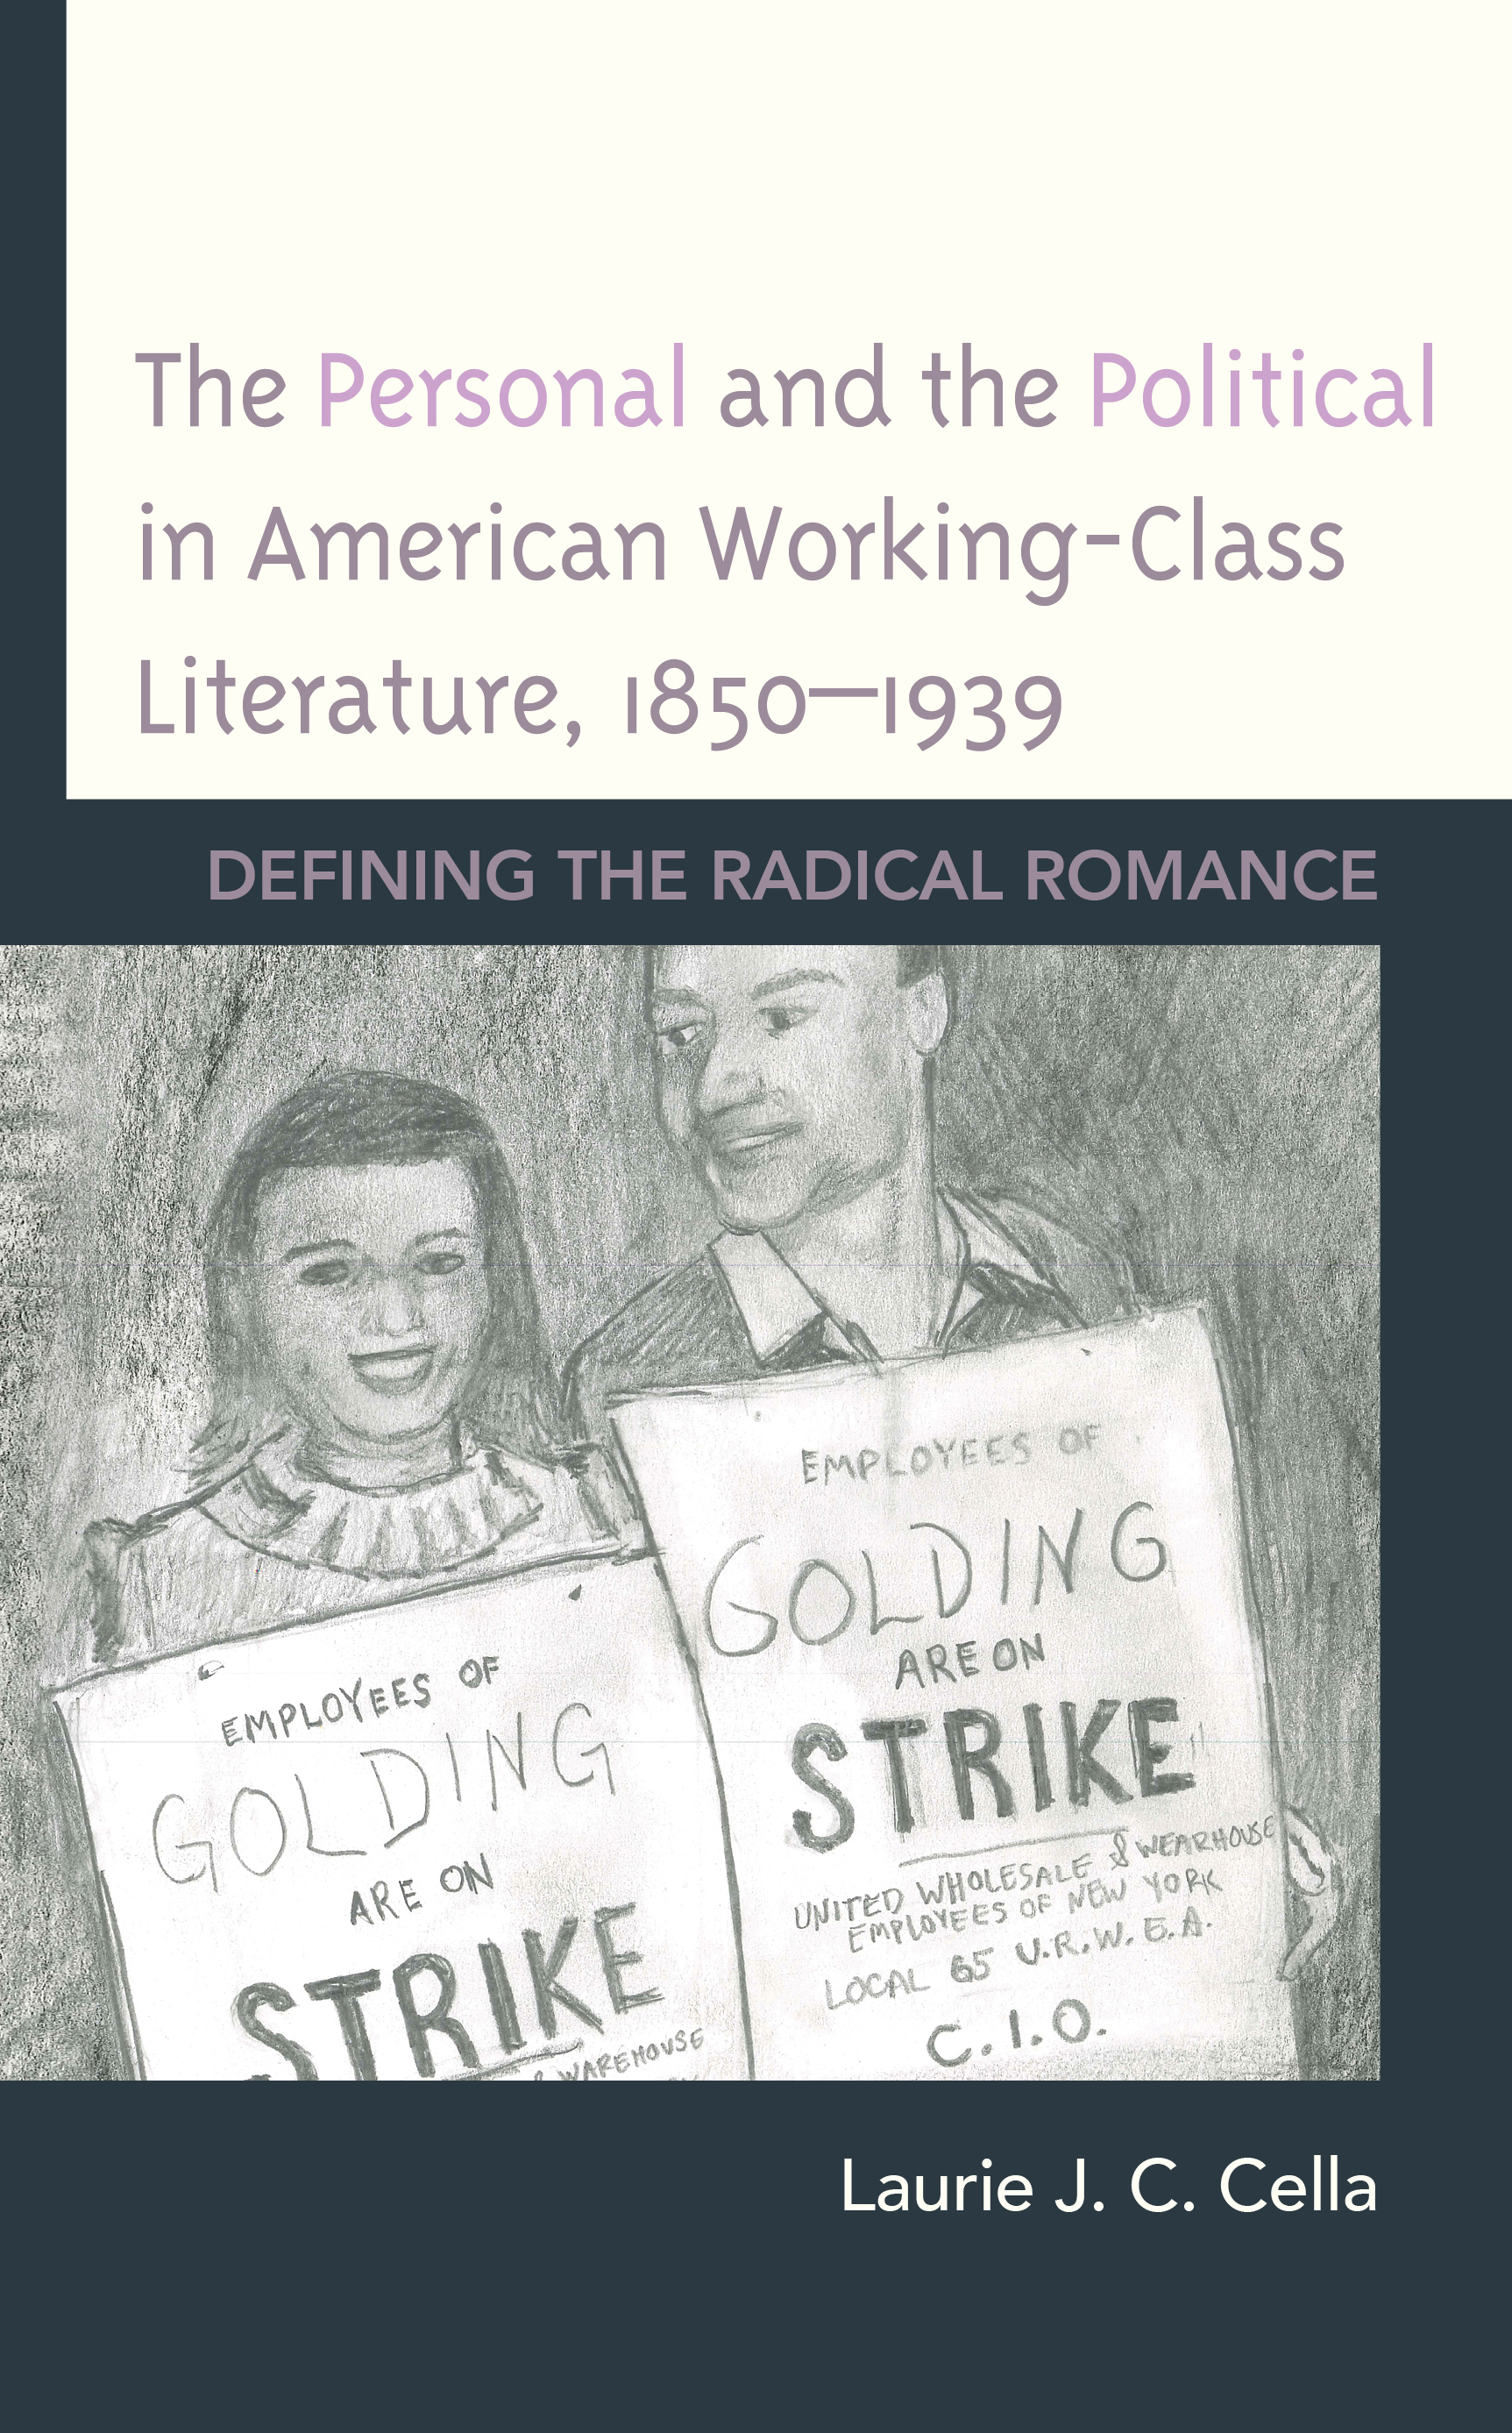 The Personal and the Political in American Working-Class Literature, 1850–1939: Defining the Radical Romance